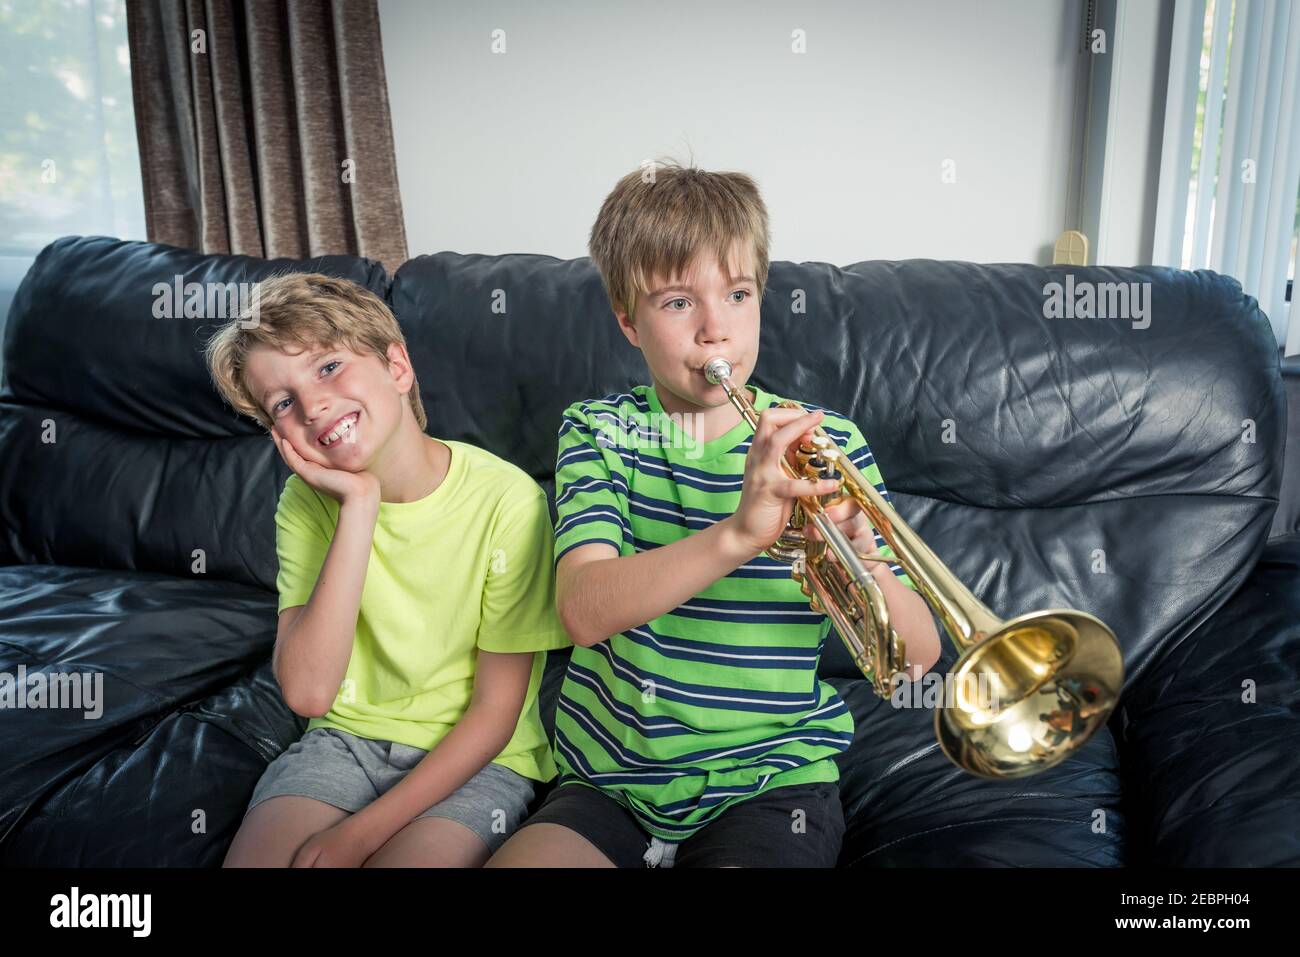 Two kids sitting on a sofa.  One is playing a trumpet and the other child is listening and smiling. Stock Photo